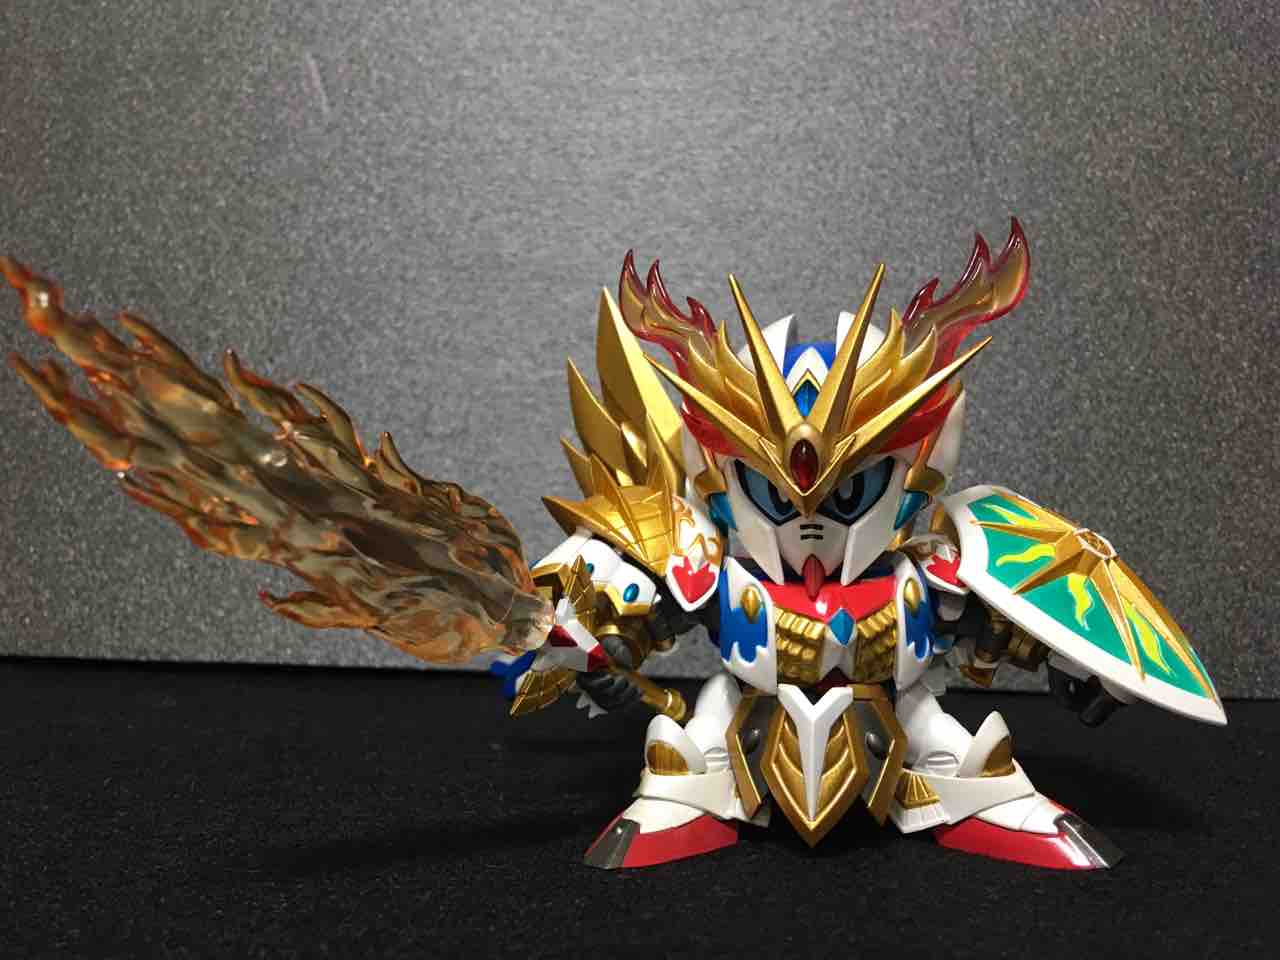 SDX 灼熱騎士ガンダムF91 レビュー : 黒守暴穏島